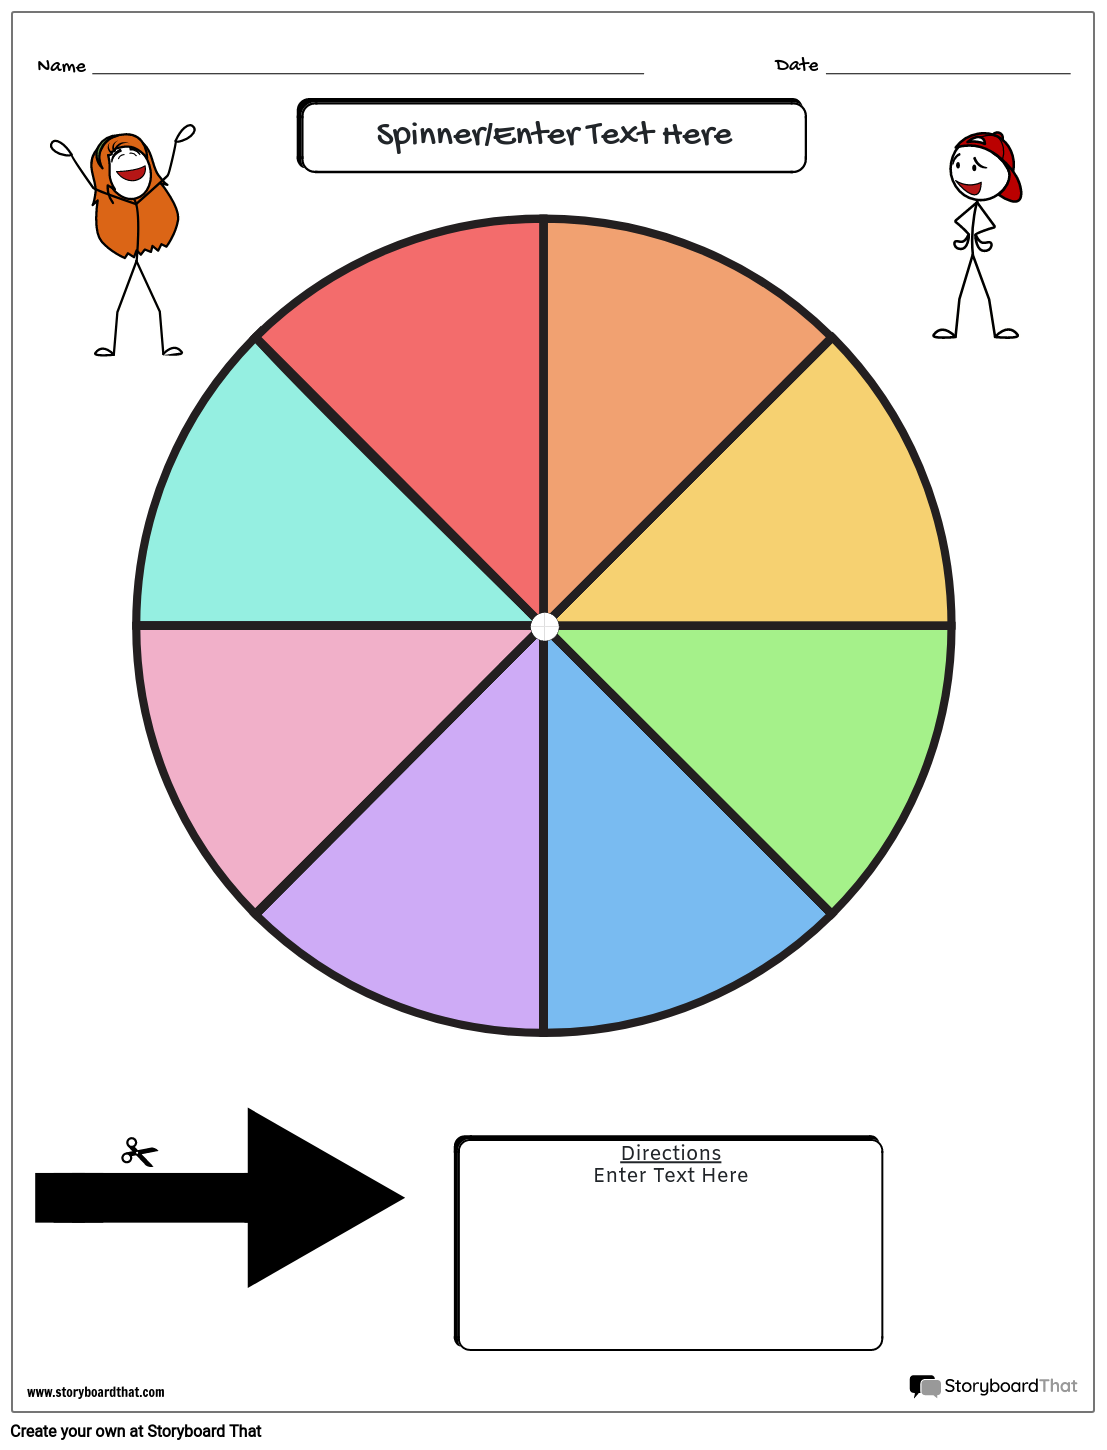 Colorful Spin the Wheel Game Worksheet Design